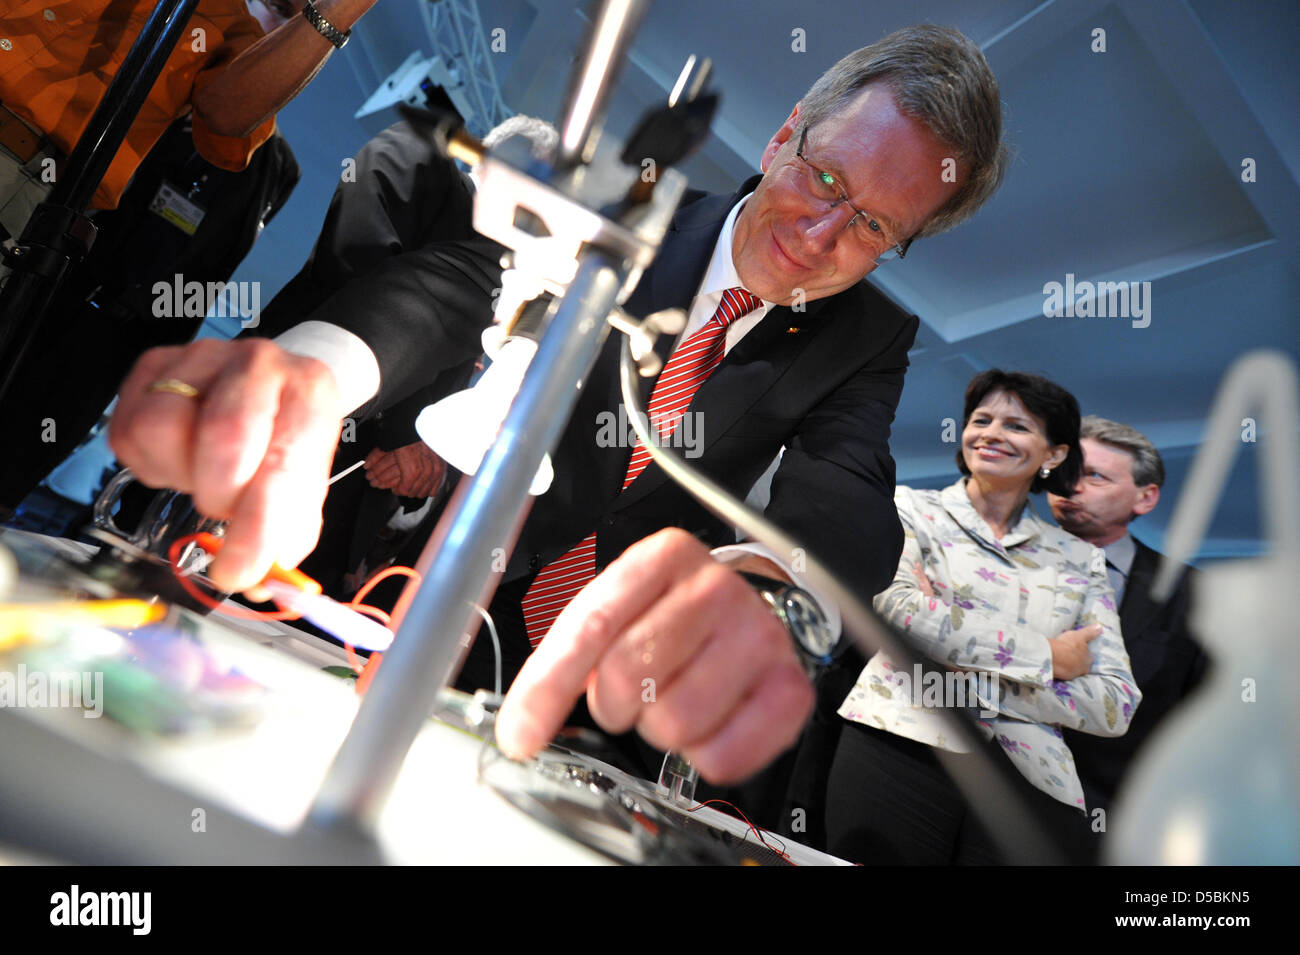 German Federal President Christian Wulff tests a solar cell with President of Switzerland, Doris Leuthard, at university 'Ecole Polythechnique Federale de Lausanne' (EPFL) in Lausanne, Switzerland, 9 September 2010. The newly elected German Federal President has arrived for his first state visit to Switzerland. Photo: RAINER JENSEN Stock Photo